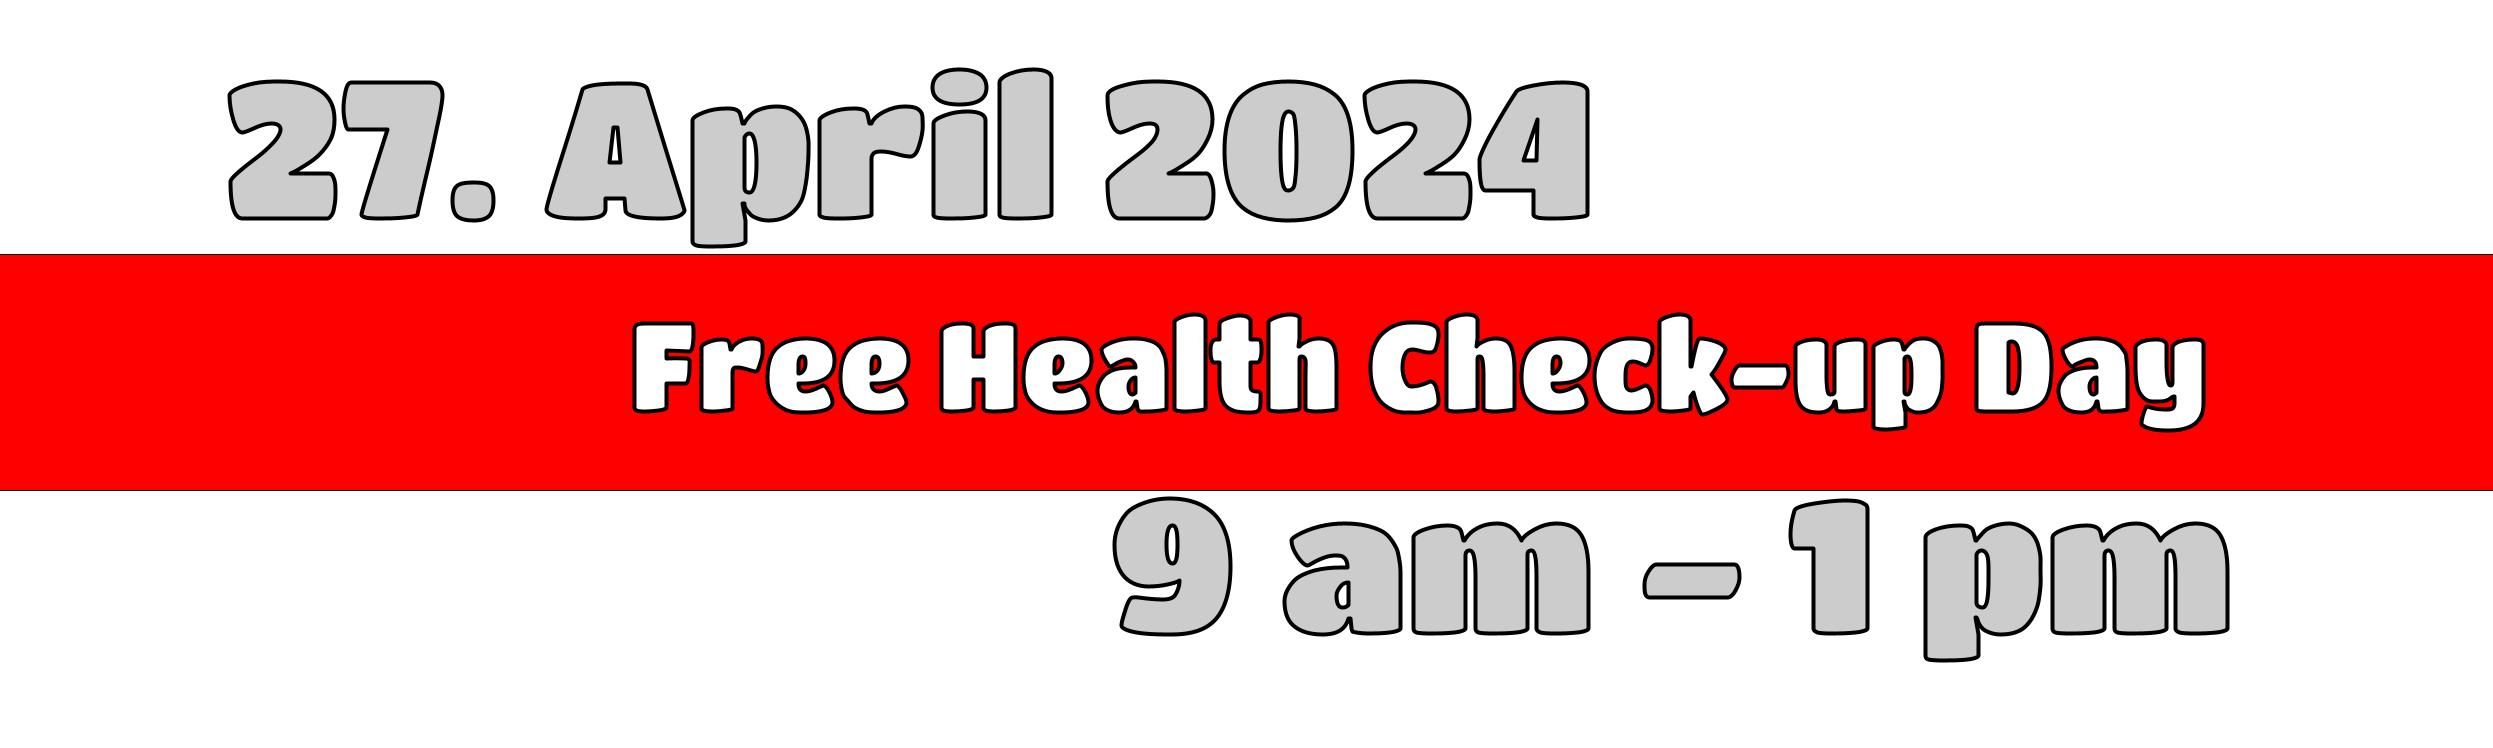 Free Health Check-Up Day on April 27th, 2024. From 9 am until 1 pm.